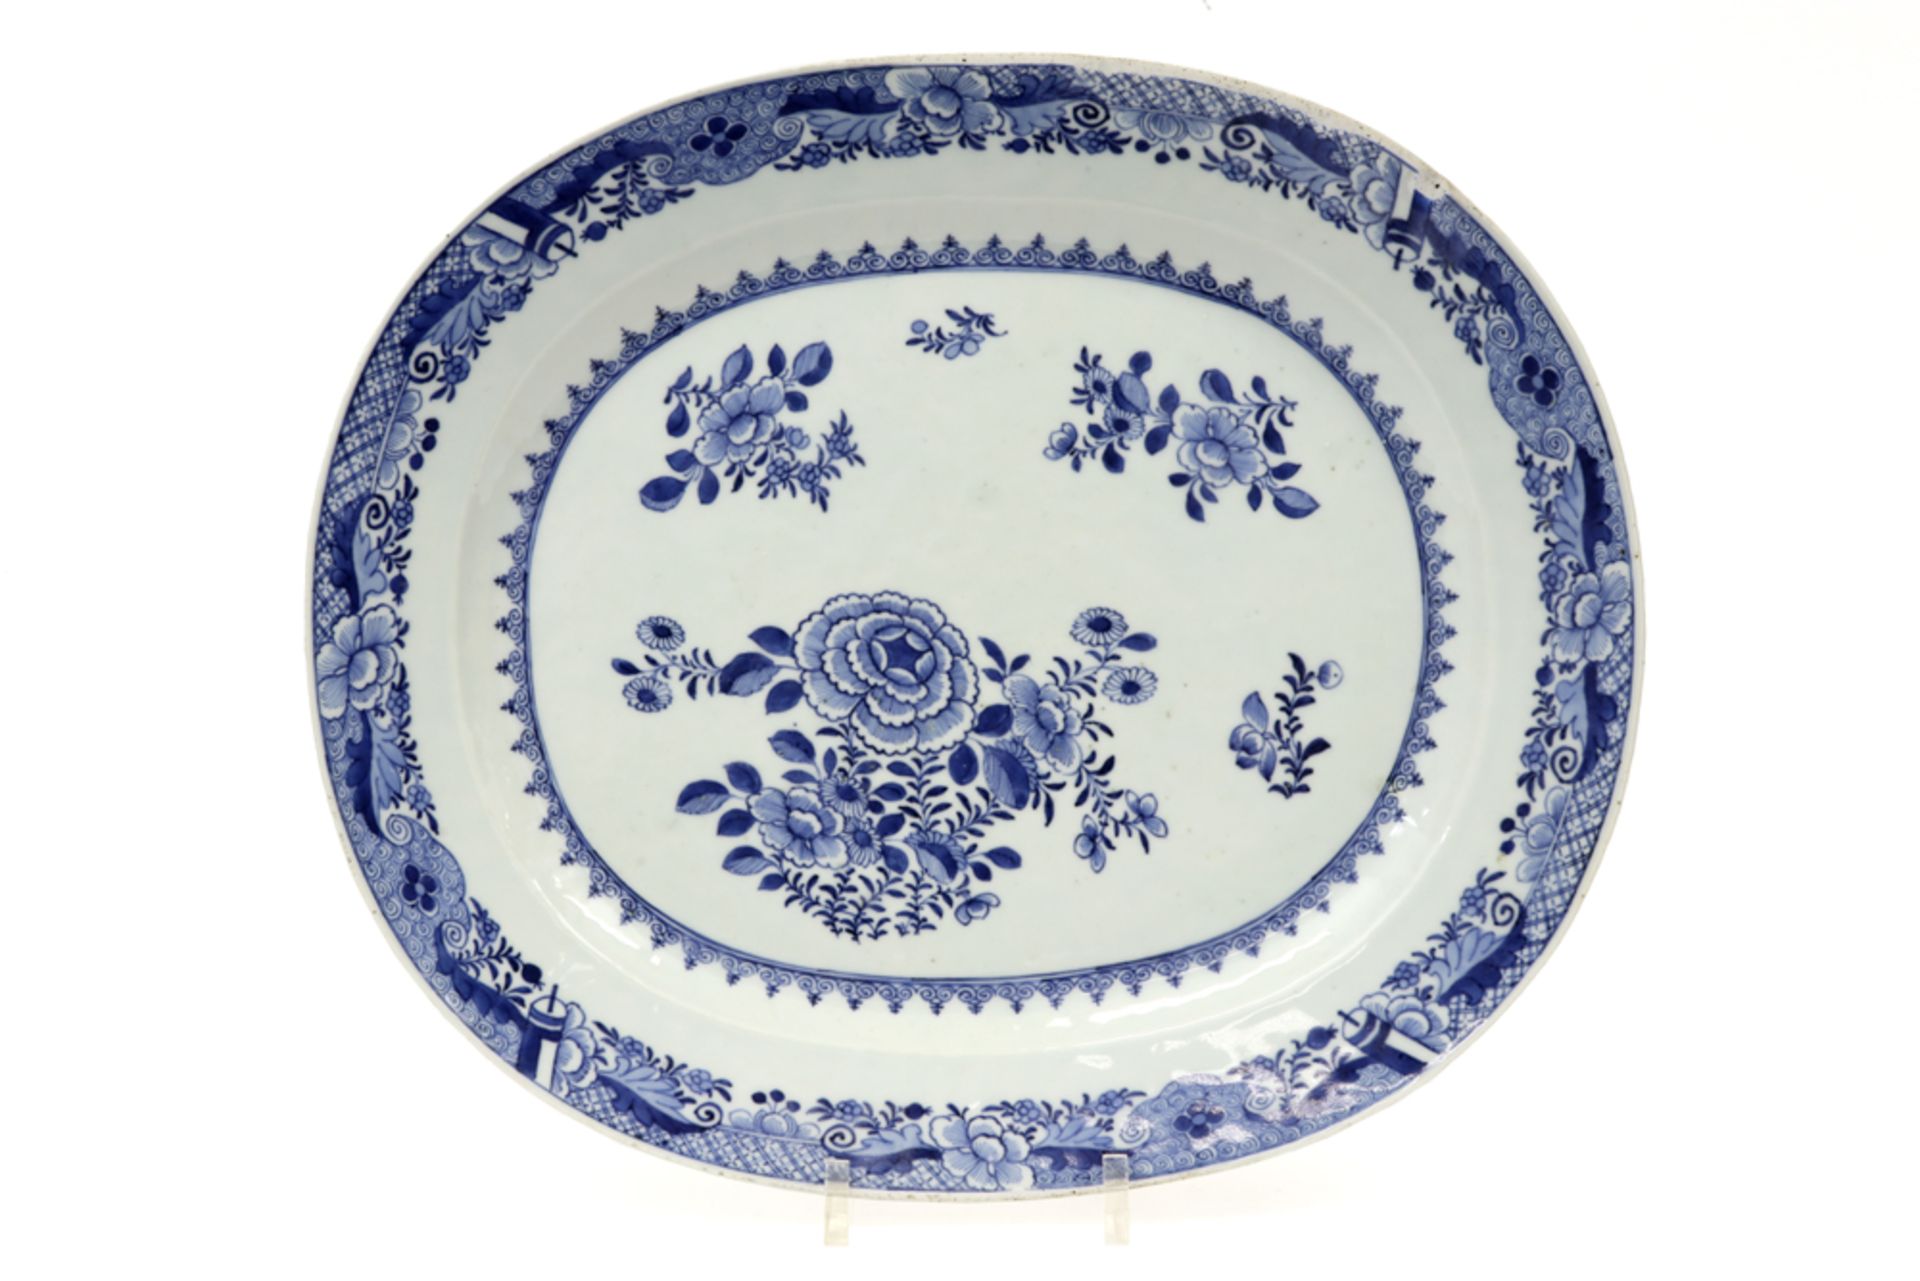 oval 18th Cent. Chinese dish in porcelain with a blue-white flower decor || Ovale achttiende